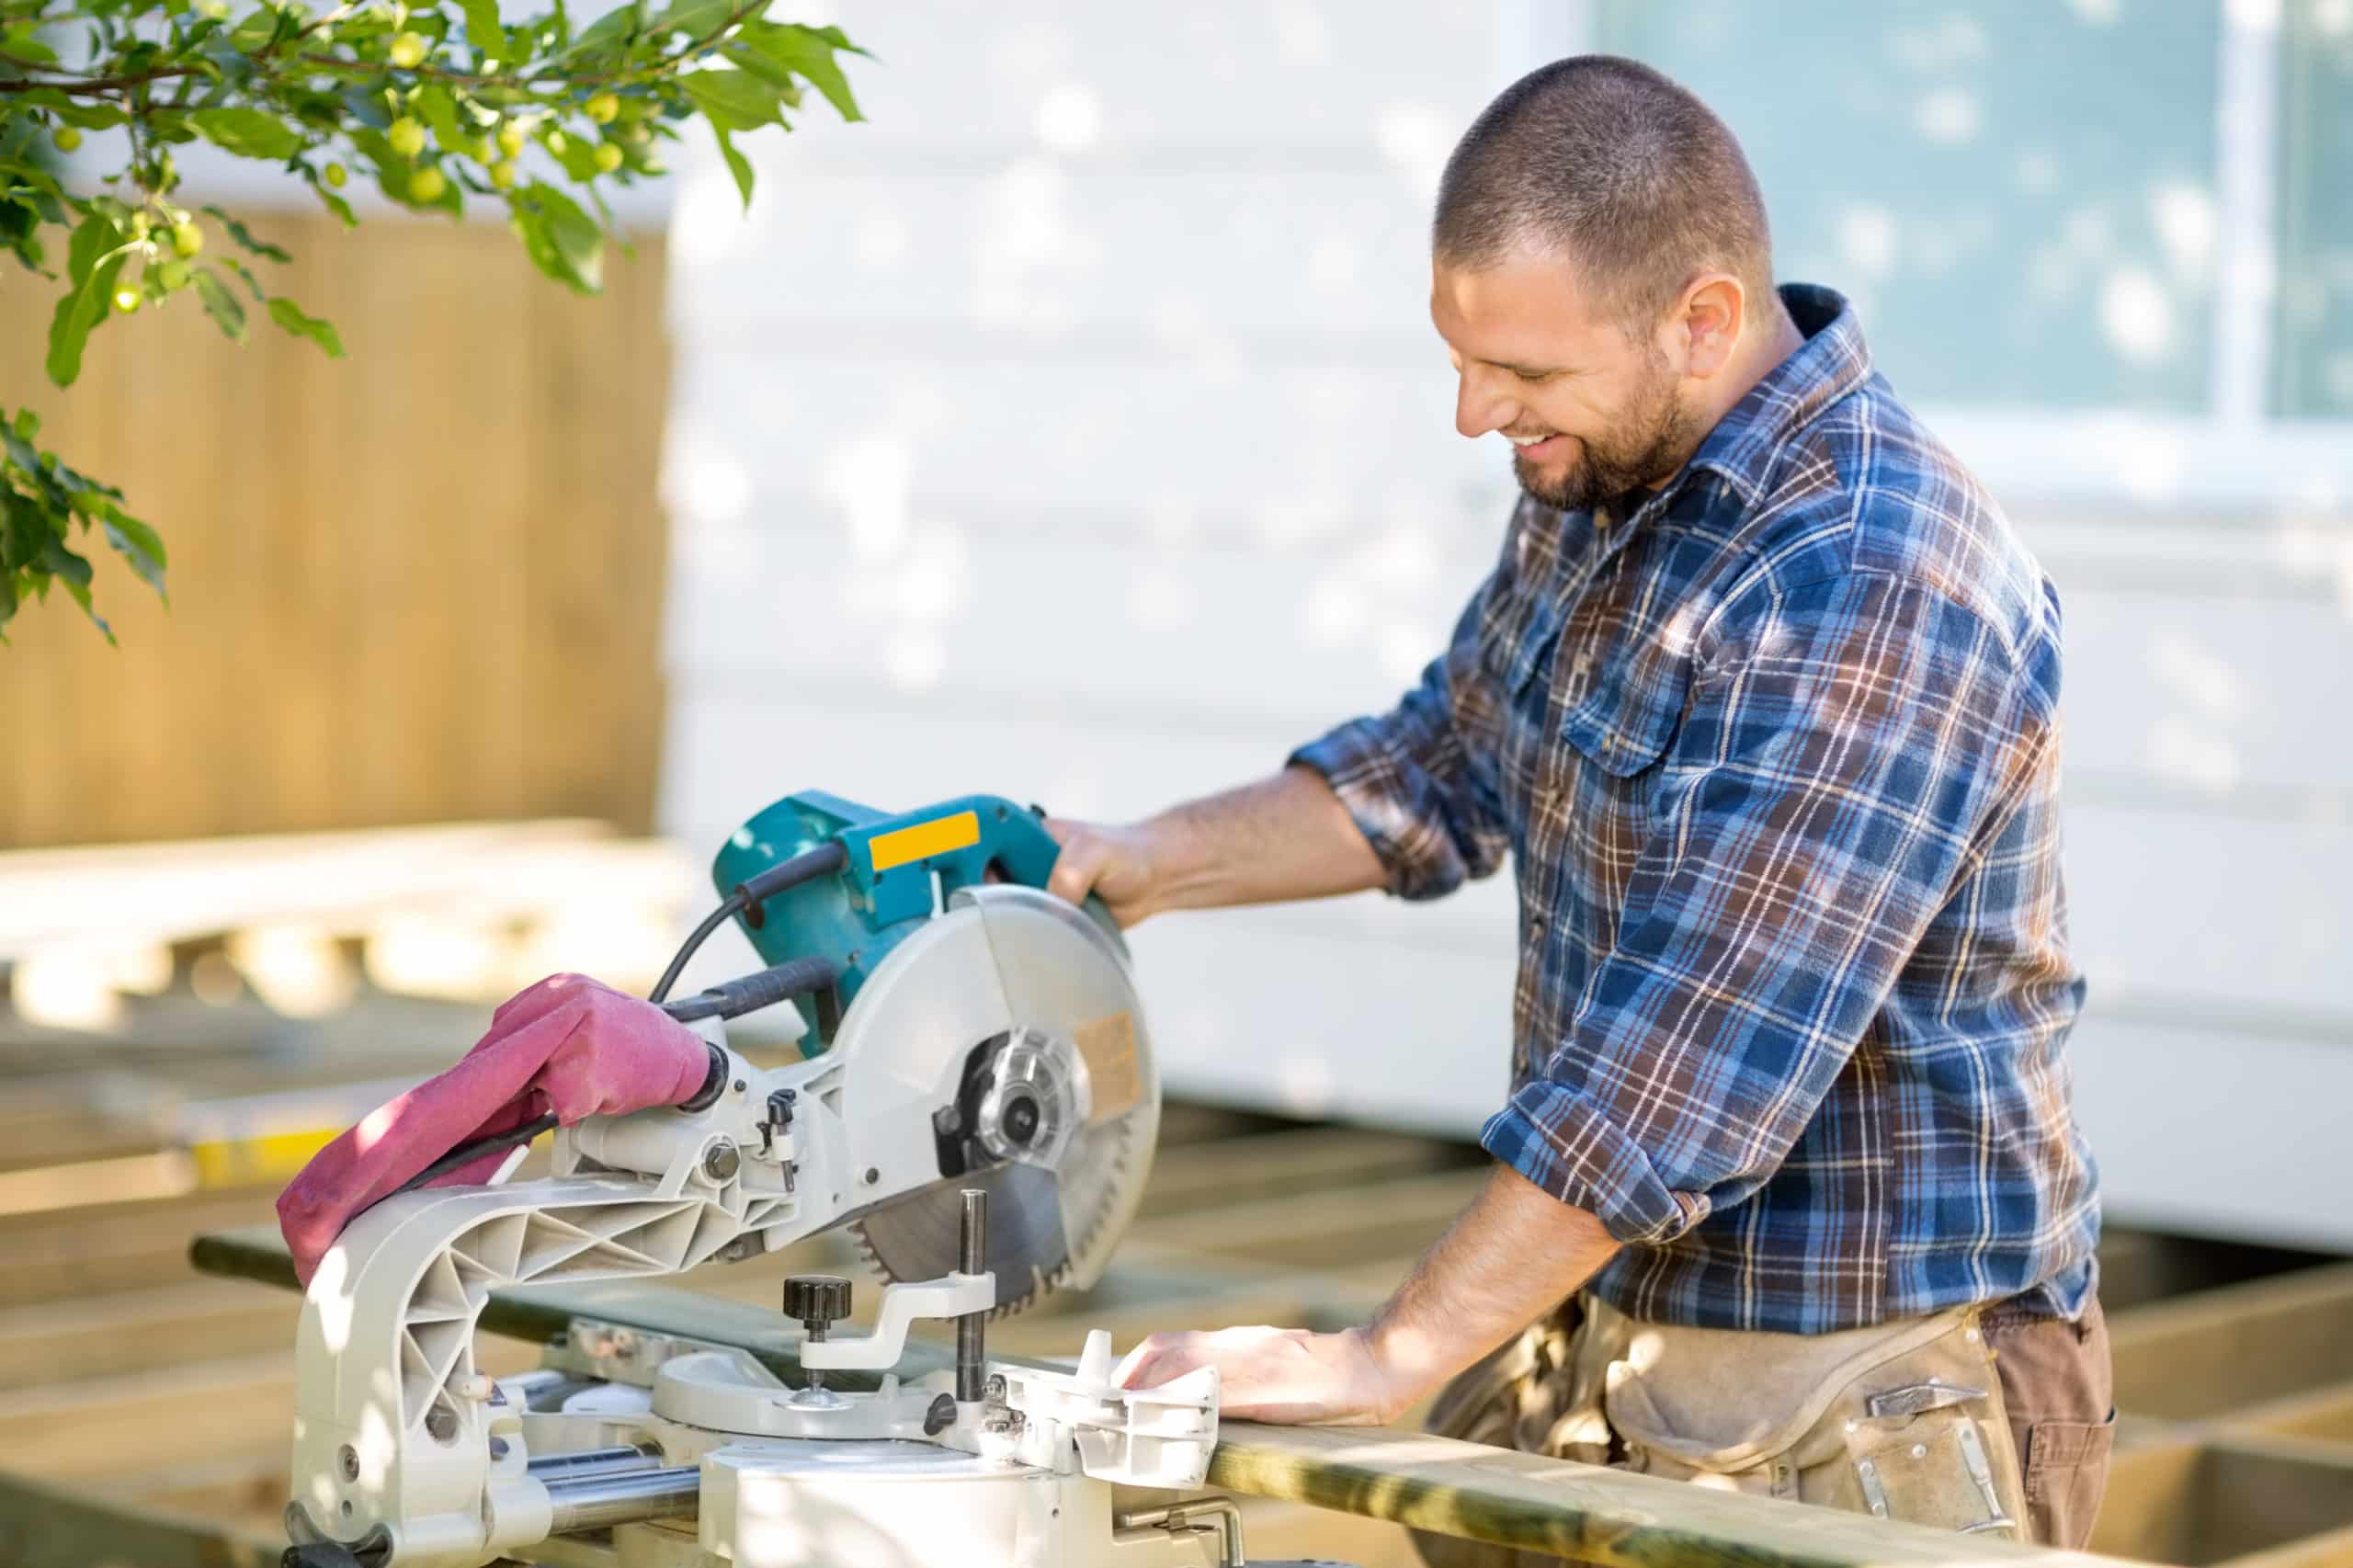 A fencing and decking business contractor uses a compound miter saw to cut boards for his latest deck build.